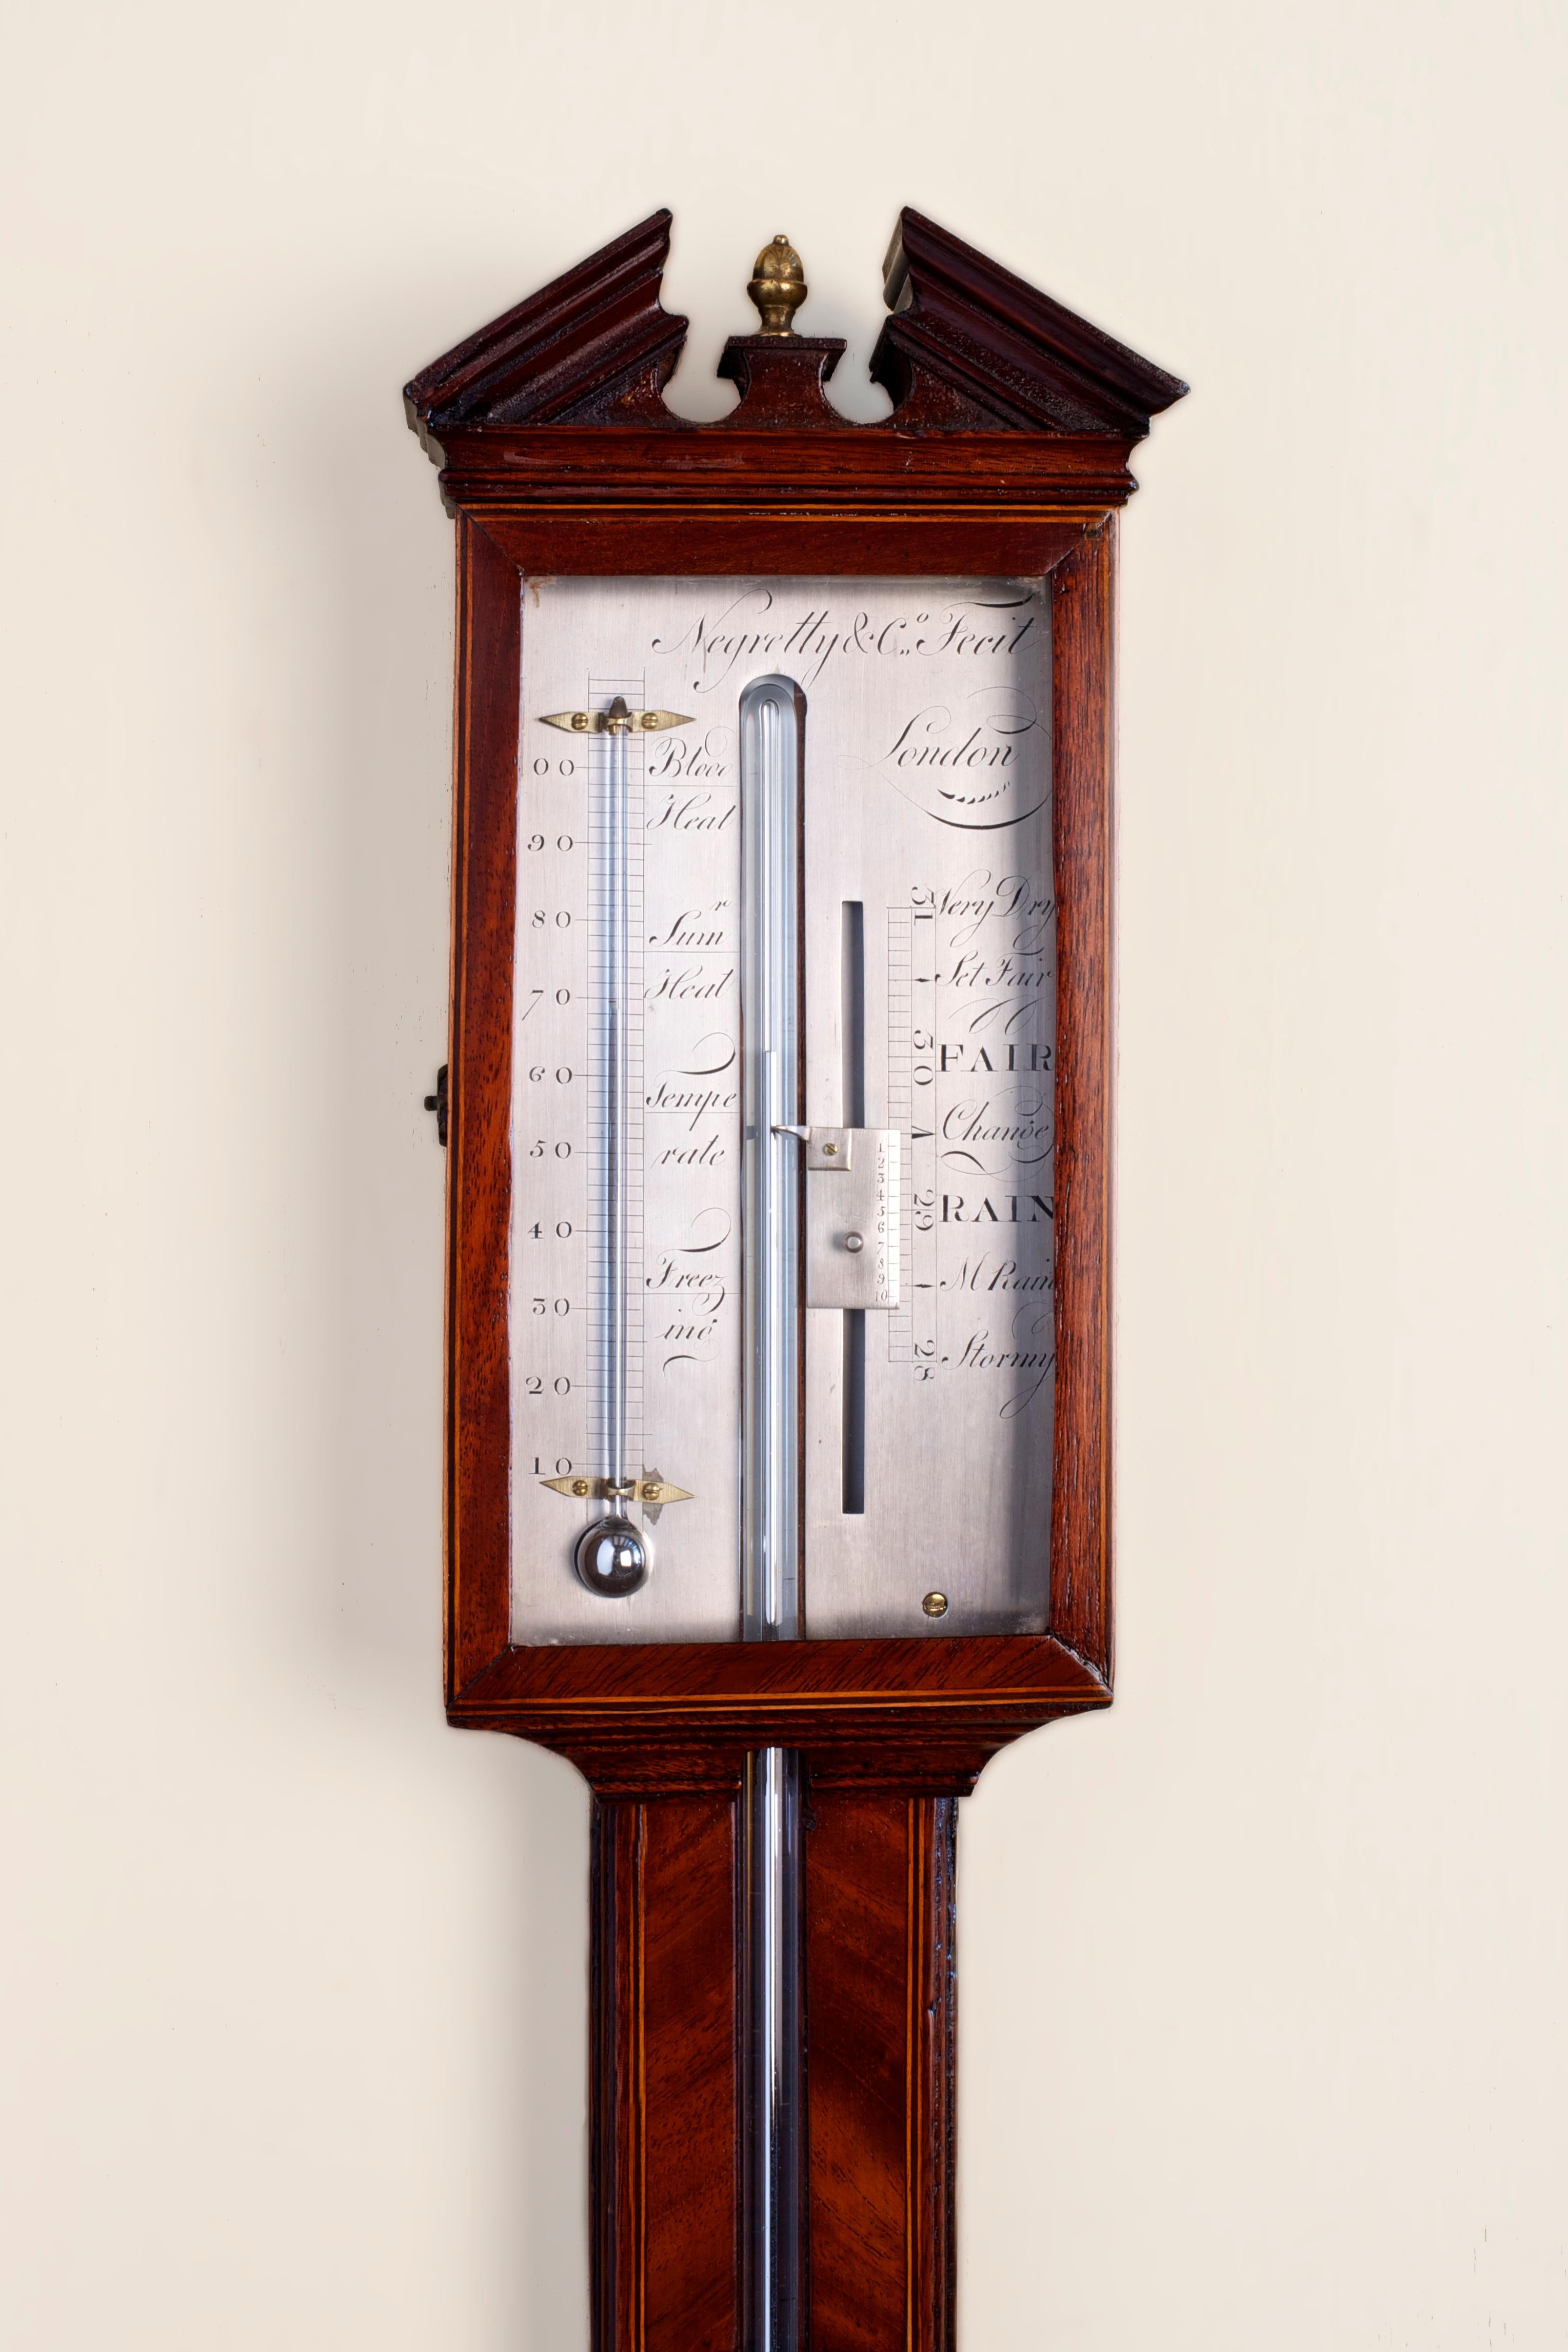 Stunning George III stick barometer


Highly grained and beautifully figured mahogany case with satinwood stringing, broken arch pediment with original brass central finial, turned and ringed cistern cover with ivory inlay. 

Glazed door